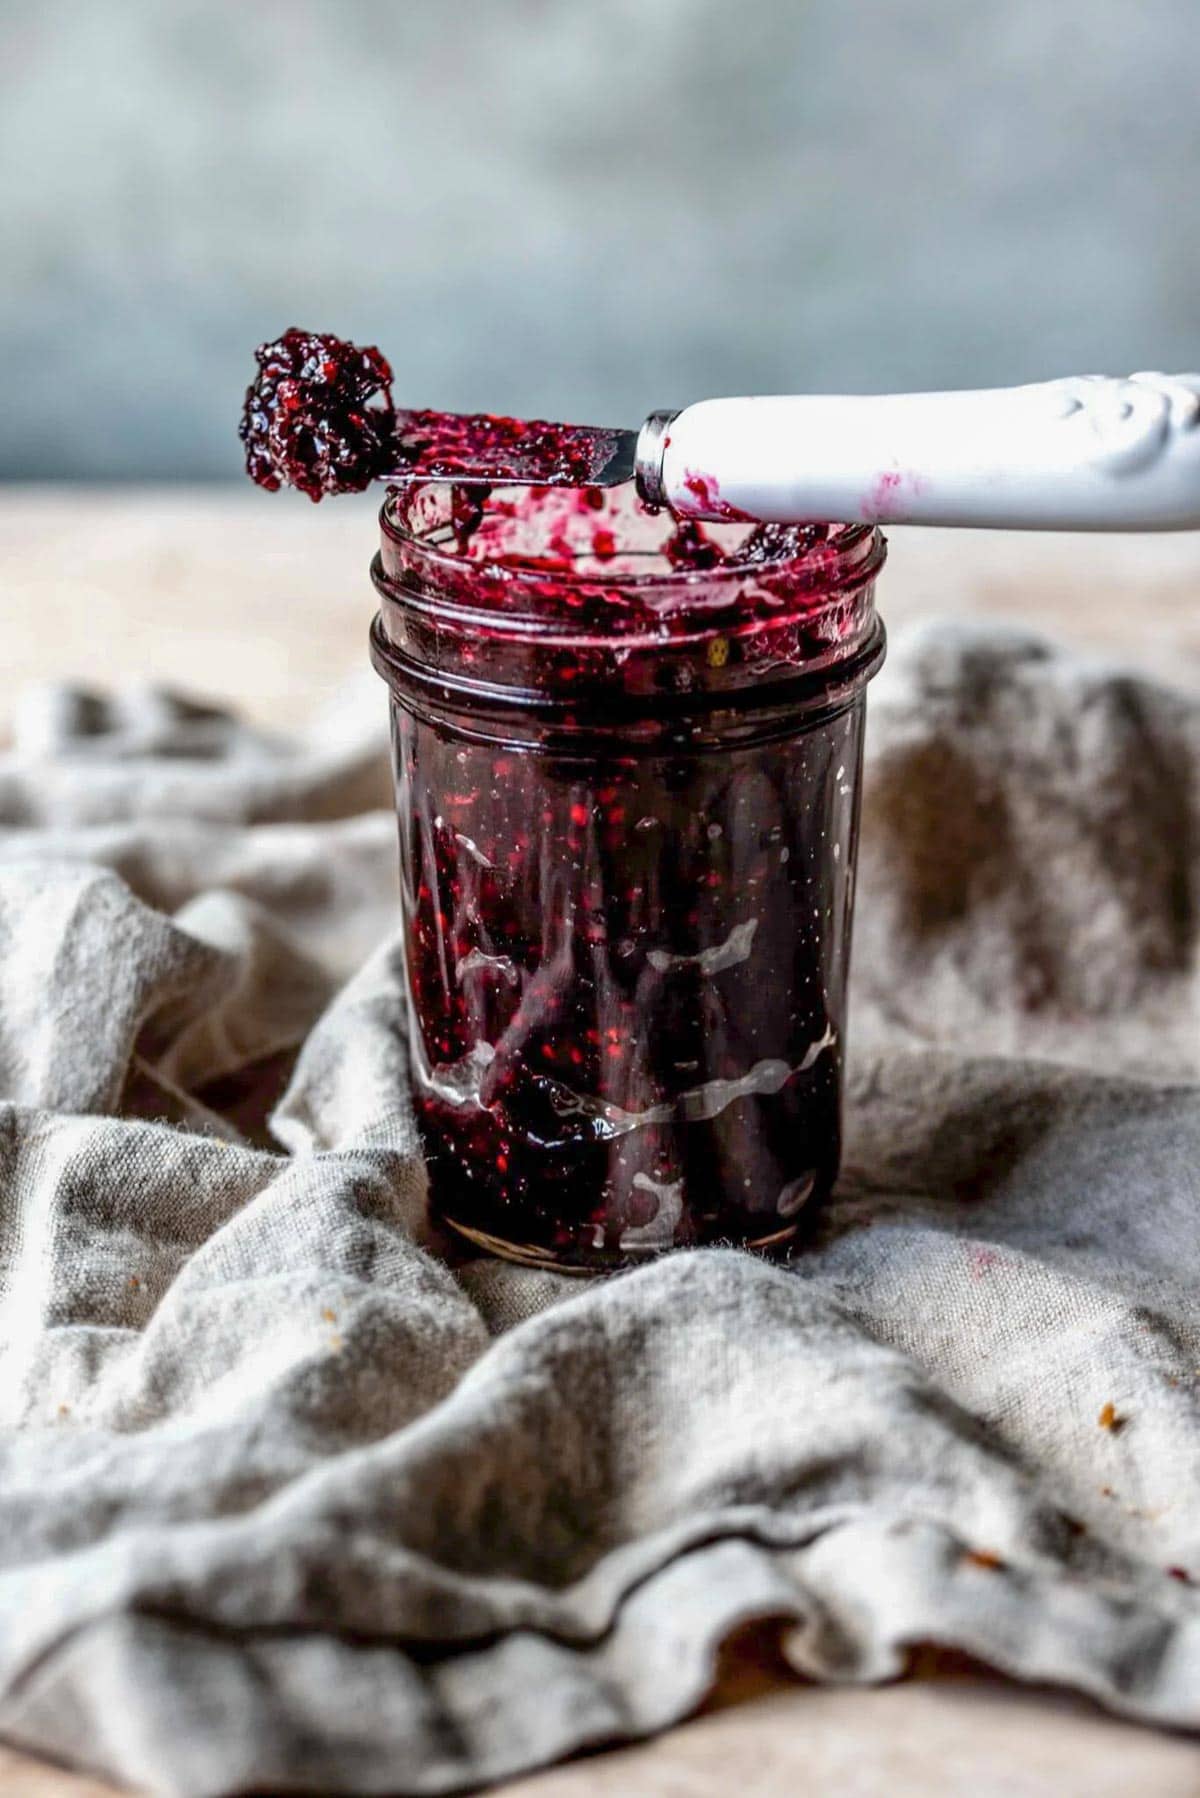 Blackberry jam in small glass jar with a small knife balancing on top of the jar, on top of a grey linen.